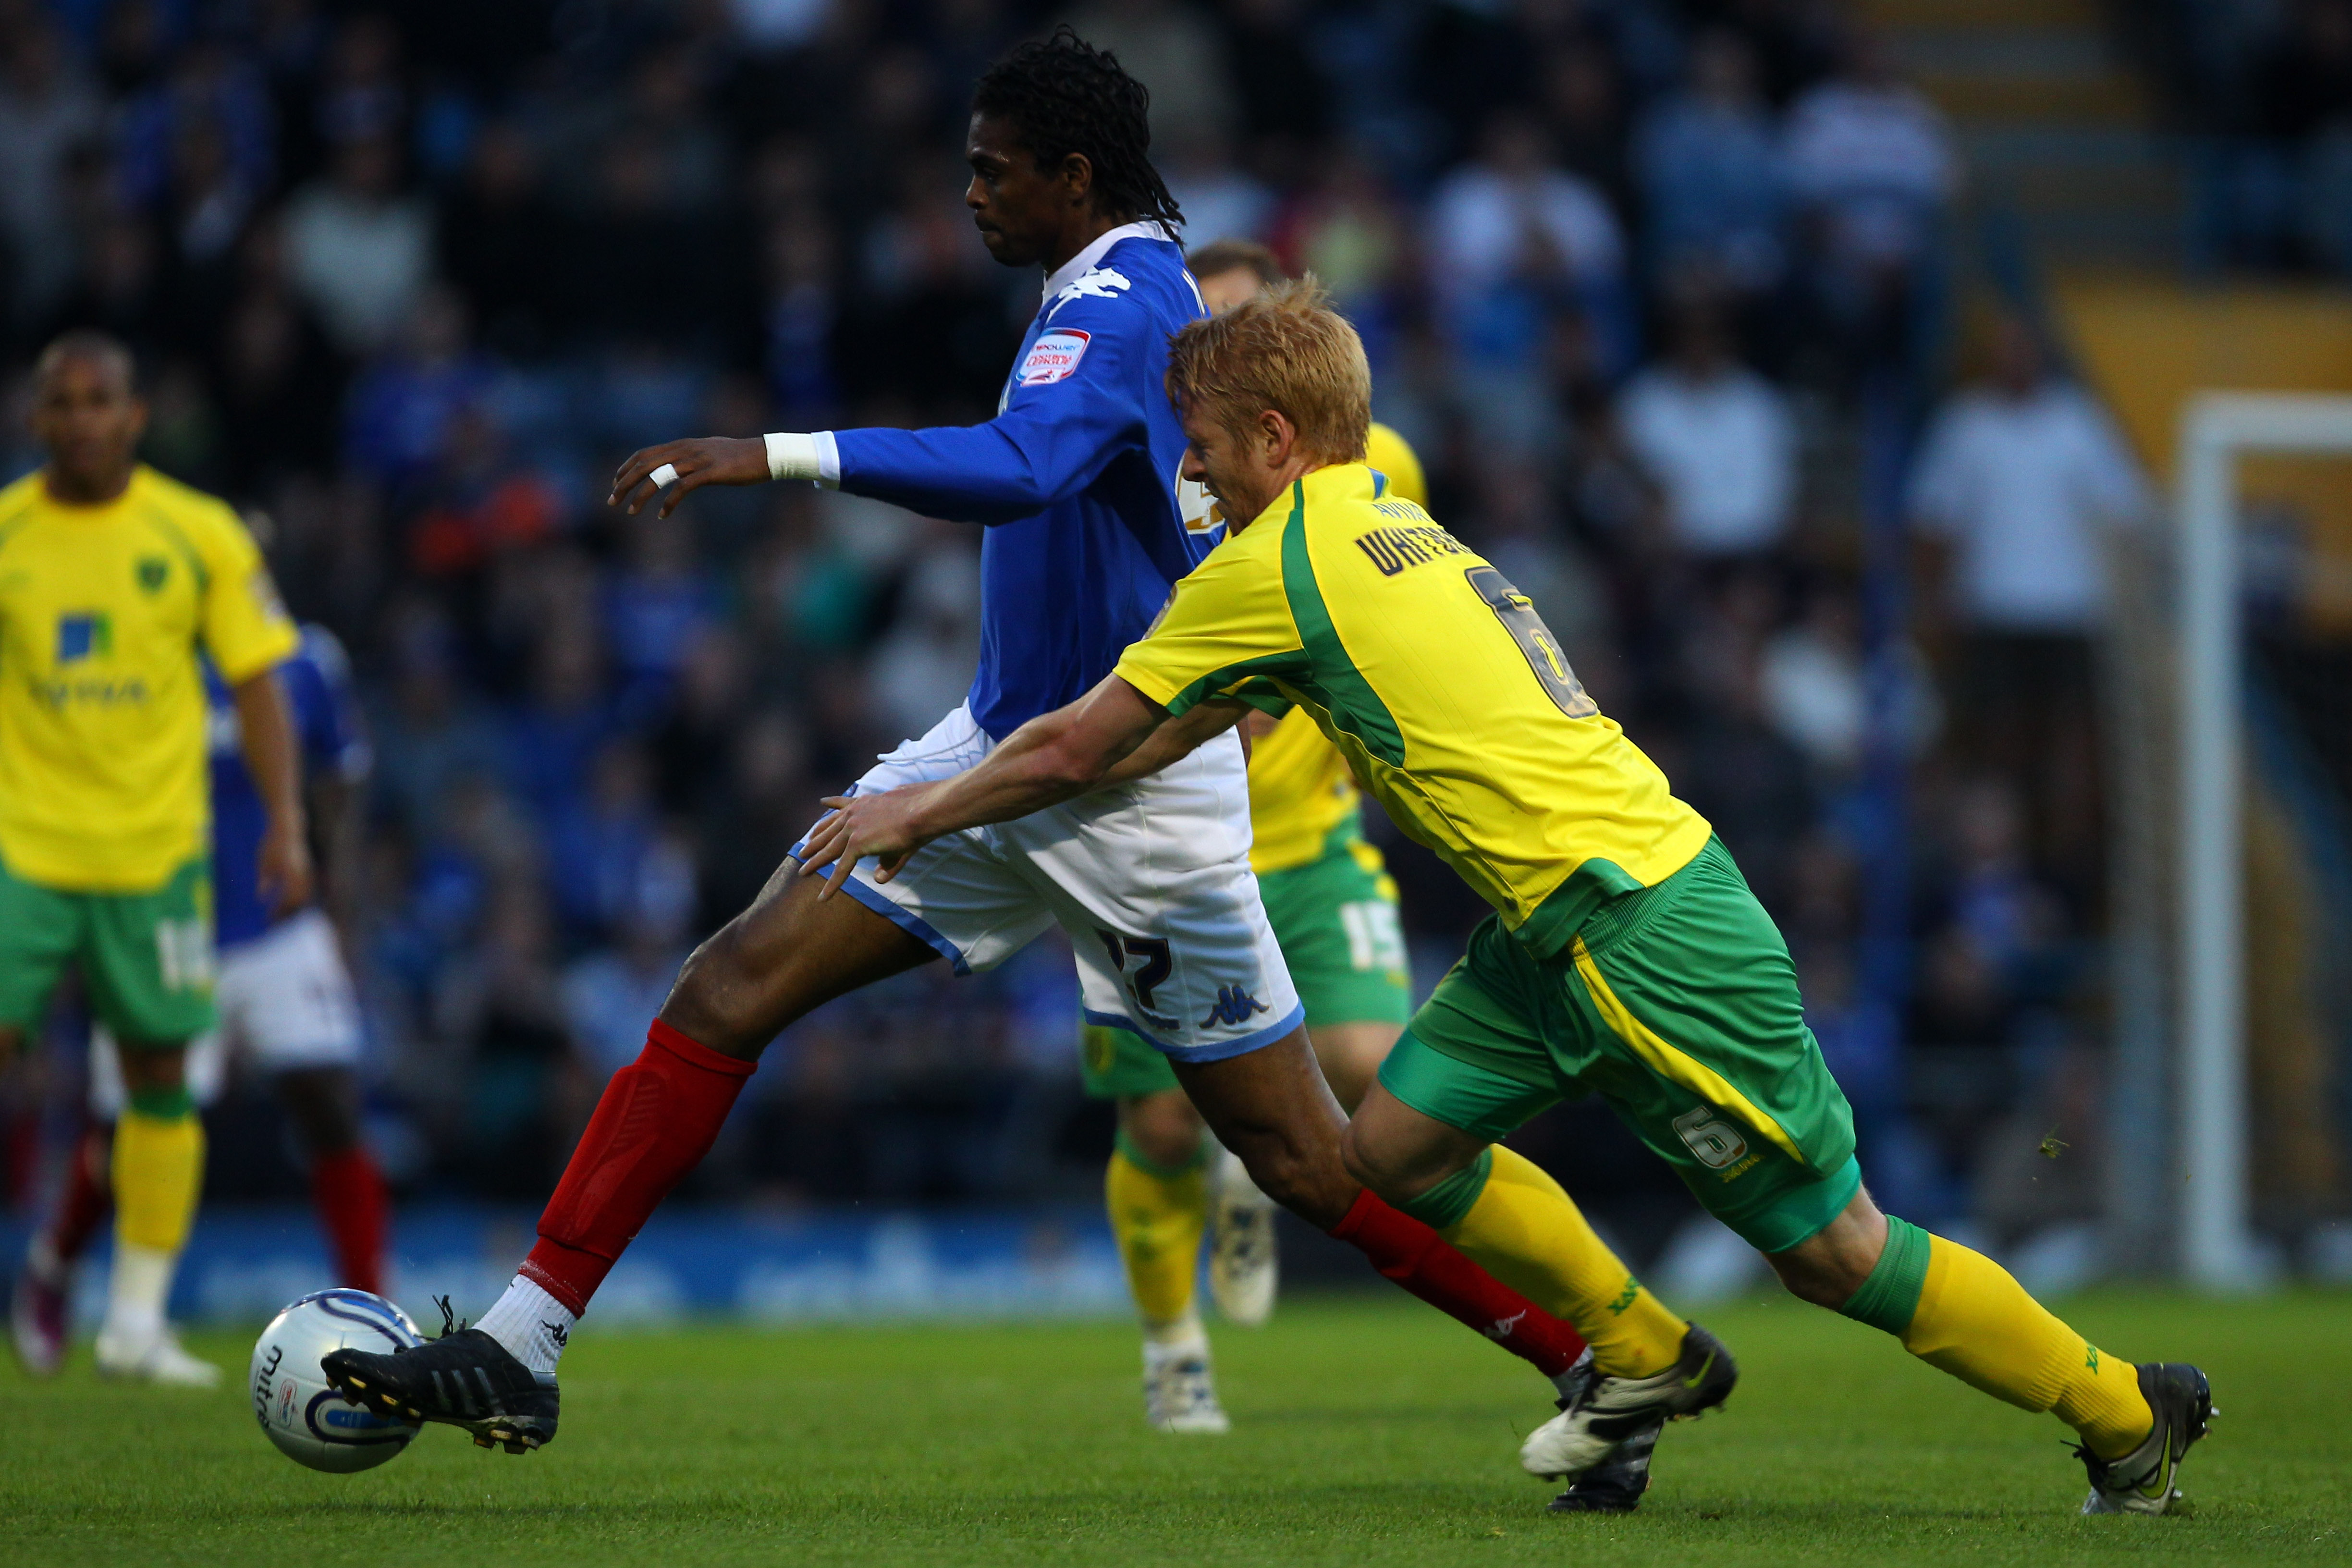 Nwankwo Kanu in action for Portsmouth against Norwich City in the Championship in May 2011.